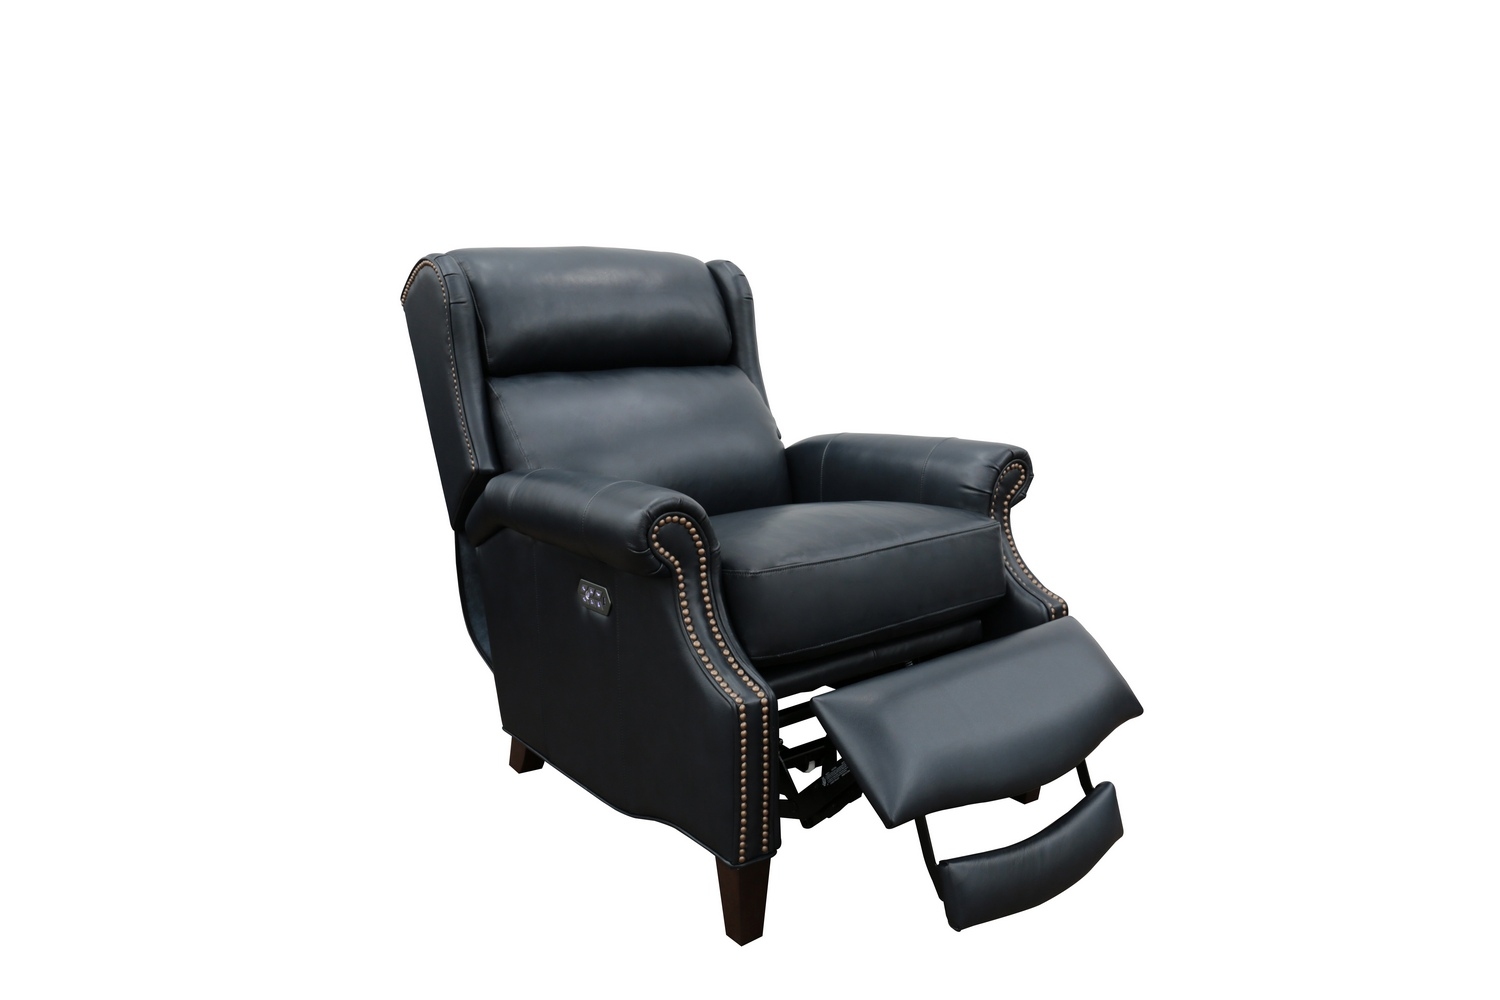 Barcalounger Philadelphia Power Recliner Chair with Power Head Rest and Lumbar - Shoreham Blue/All Leather